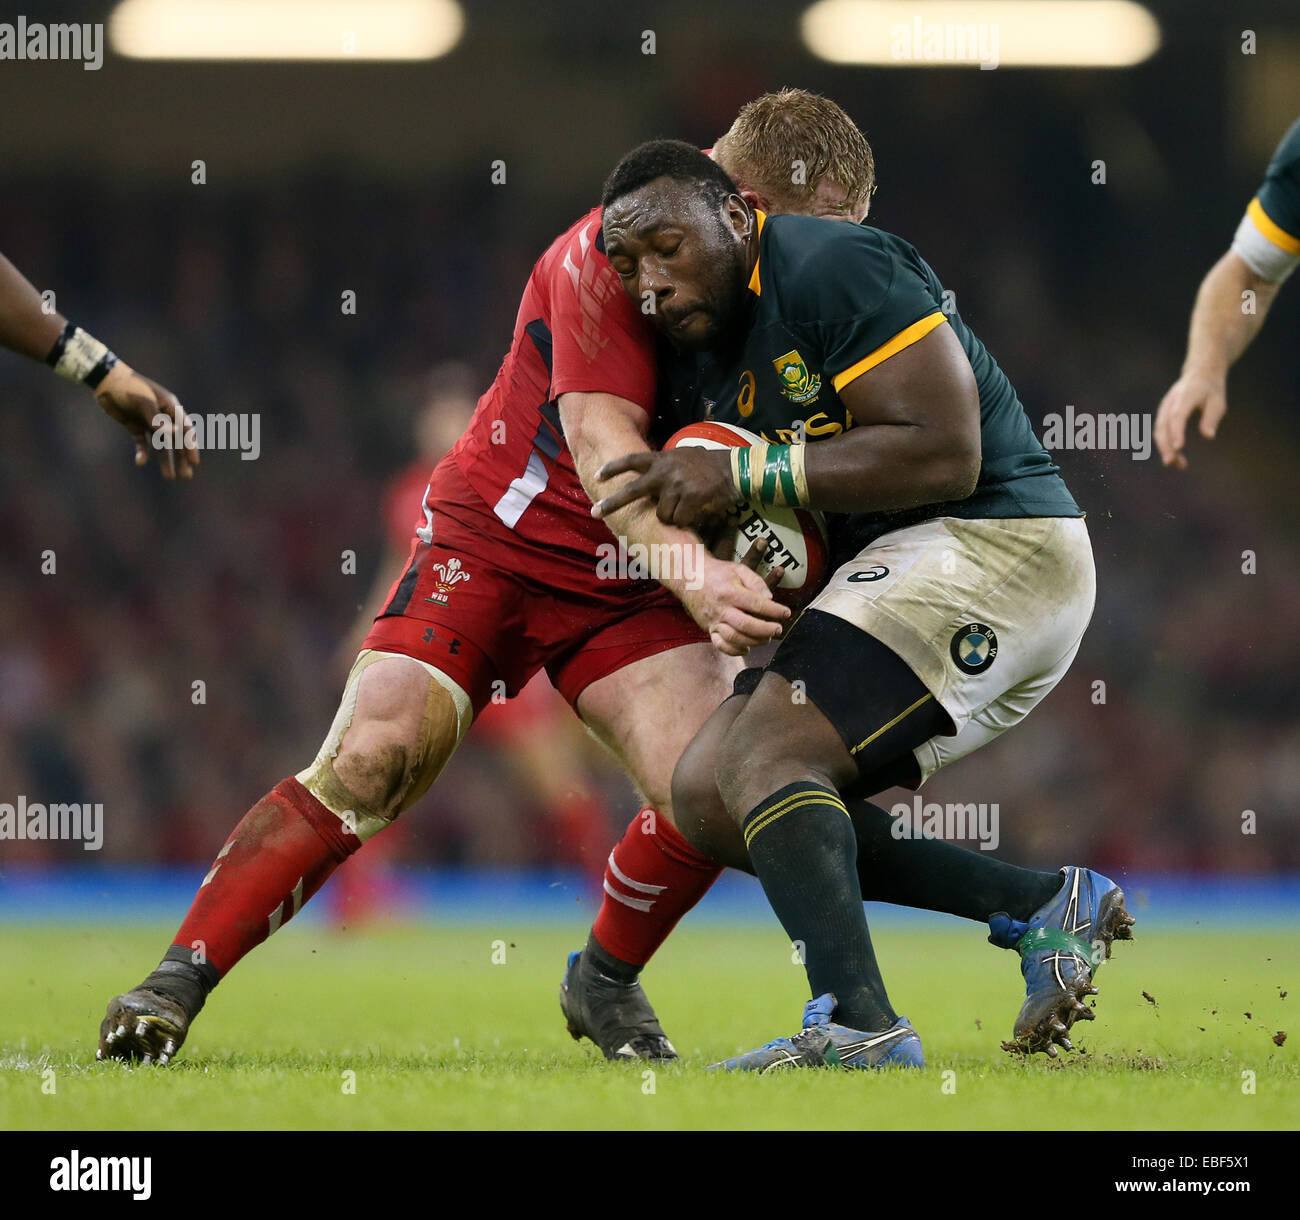 Cardiff, UK. 29th Nov, 2014. Teboho Mohoje of South Africa tackled by Samson Lee of Wales - Autumn Internationals - Wales vs South Africa - Millennium Stadium - Cardiff - Wales - 29th November 2014 - Picture Simon Bellis/Sportimage. Credit:  csm/Alamy Live News Stock Photo